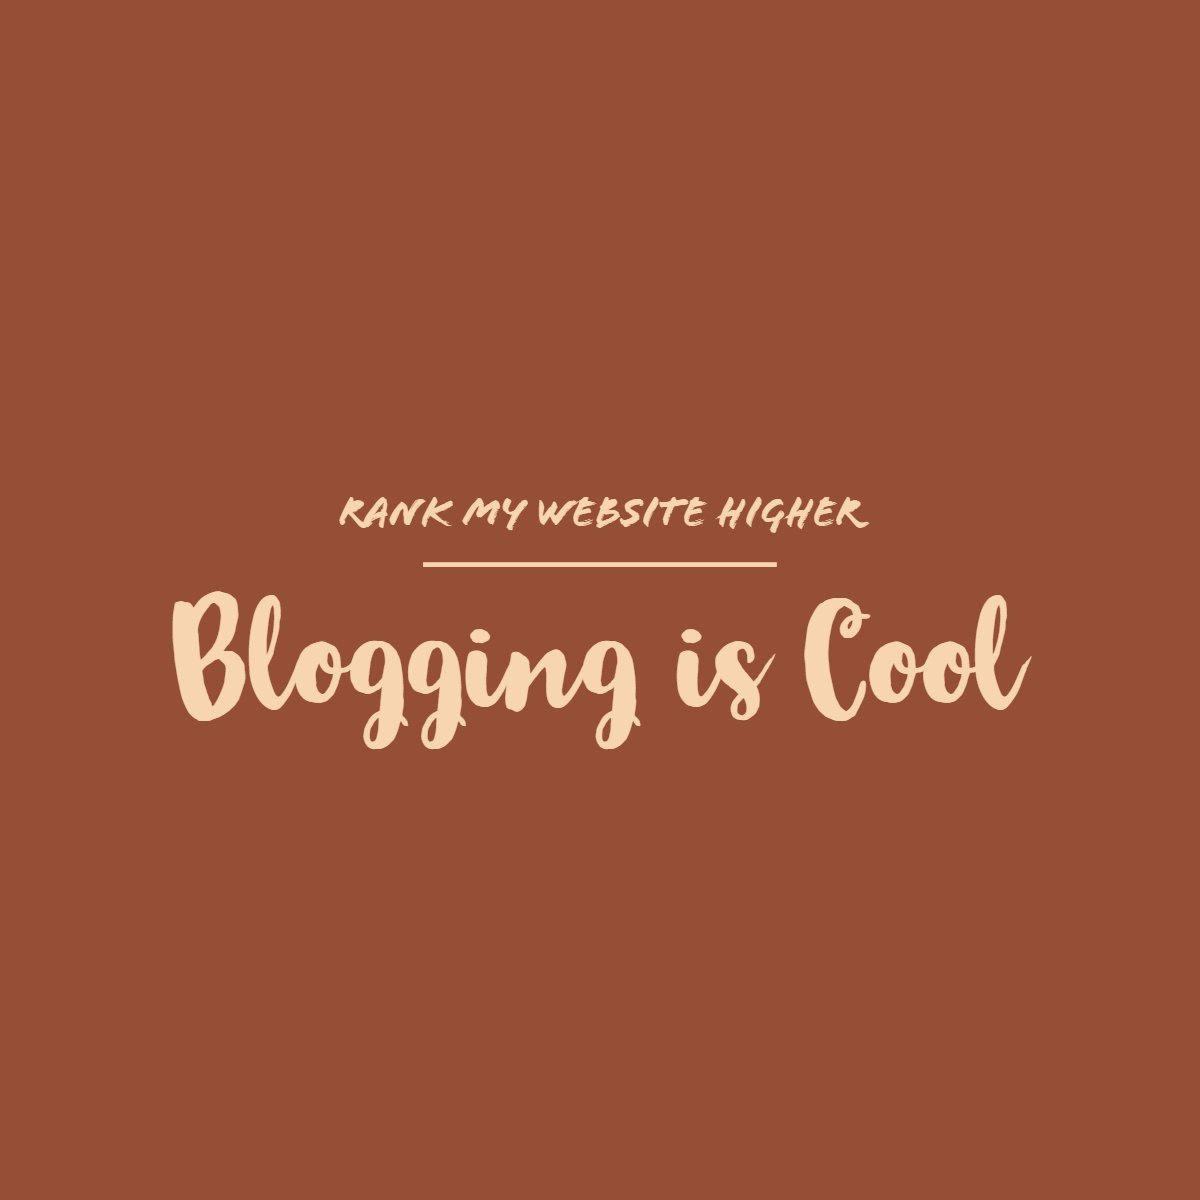 50 websites that could Inspire Your Blogging Journey